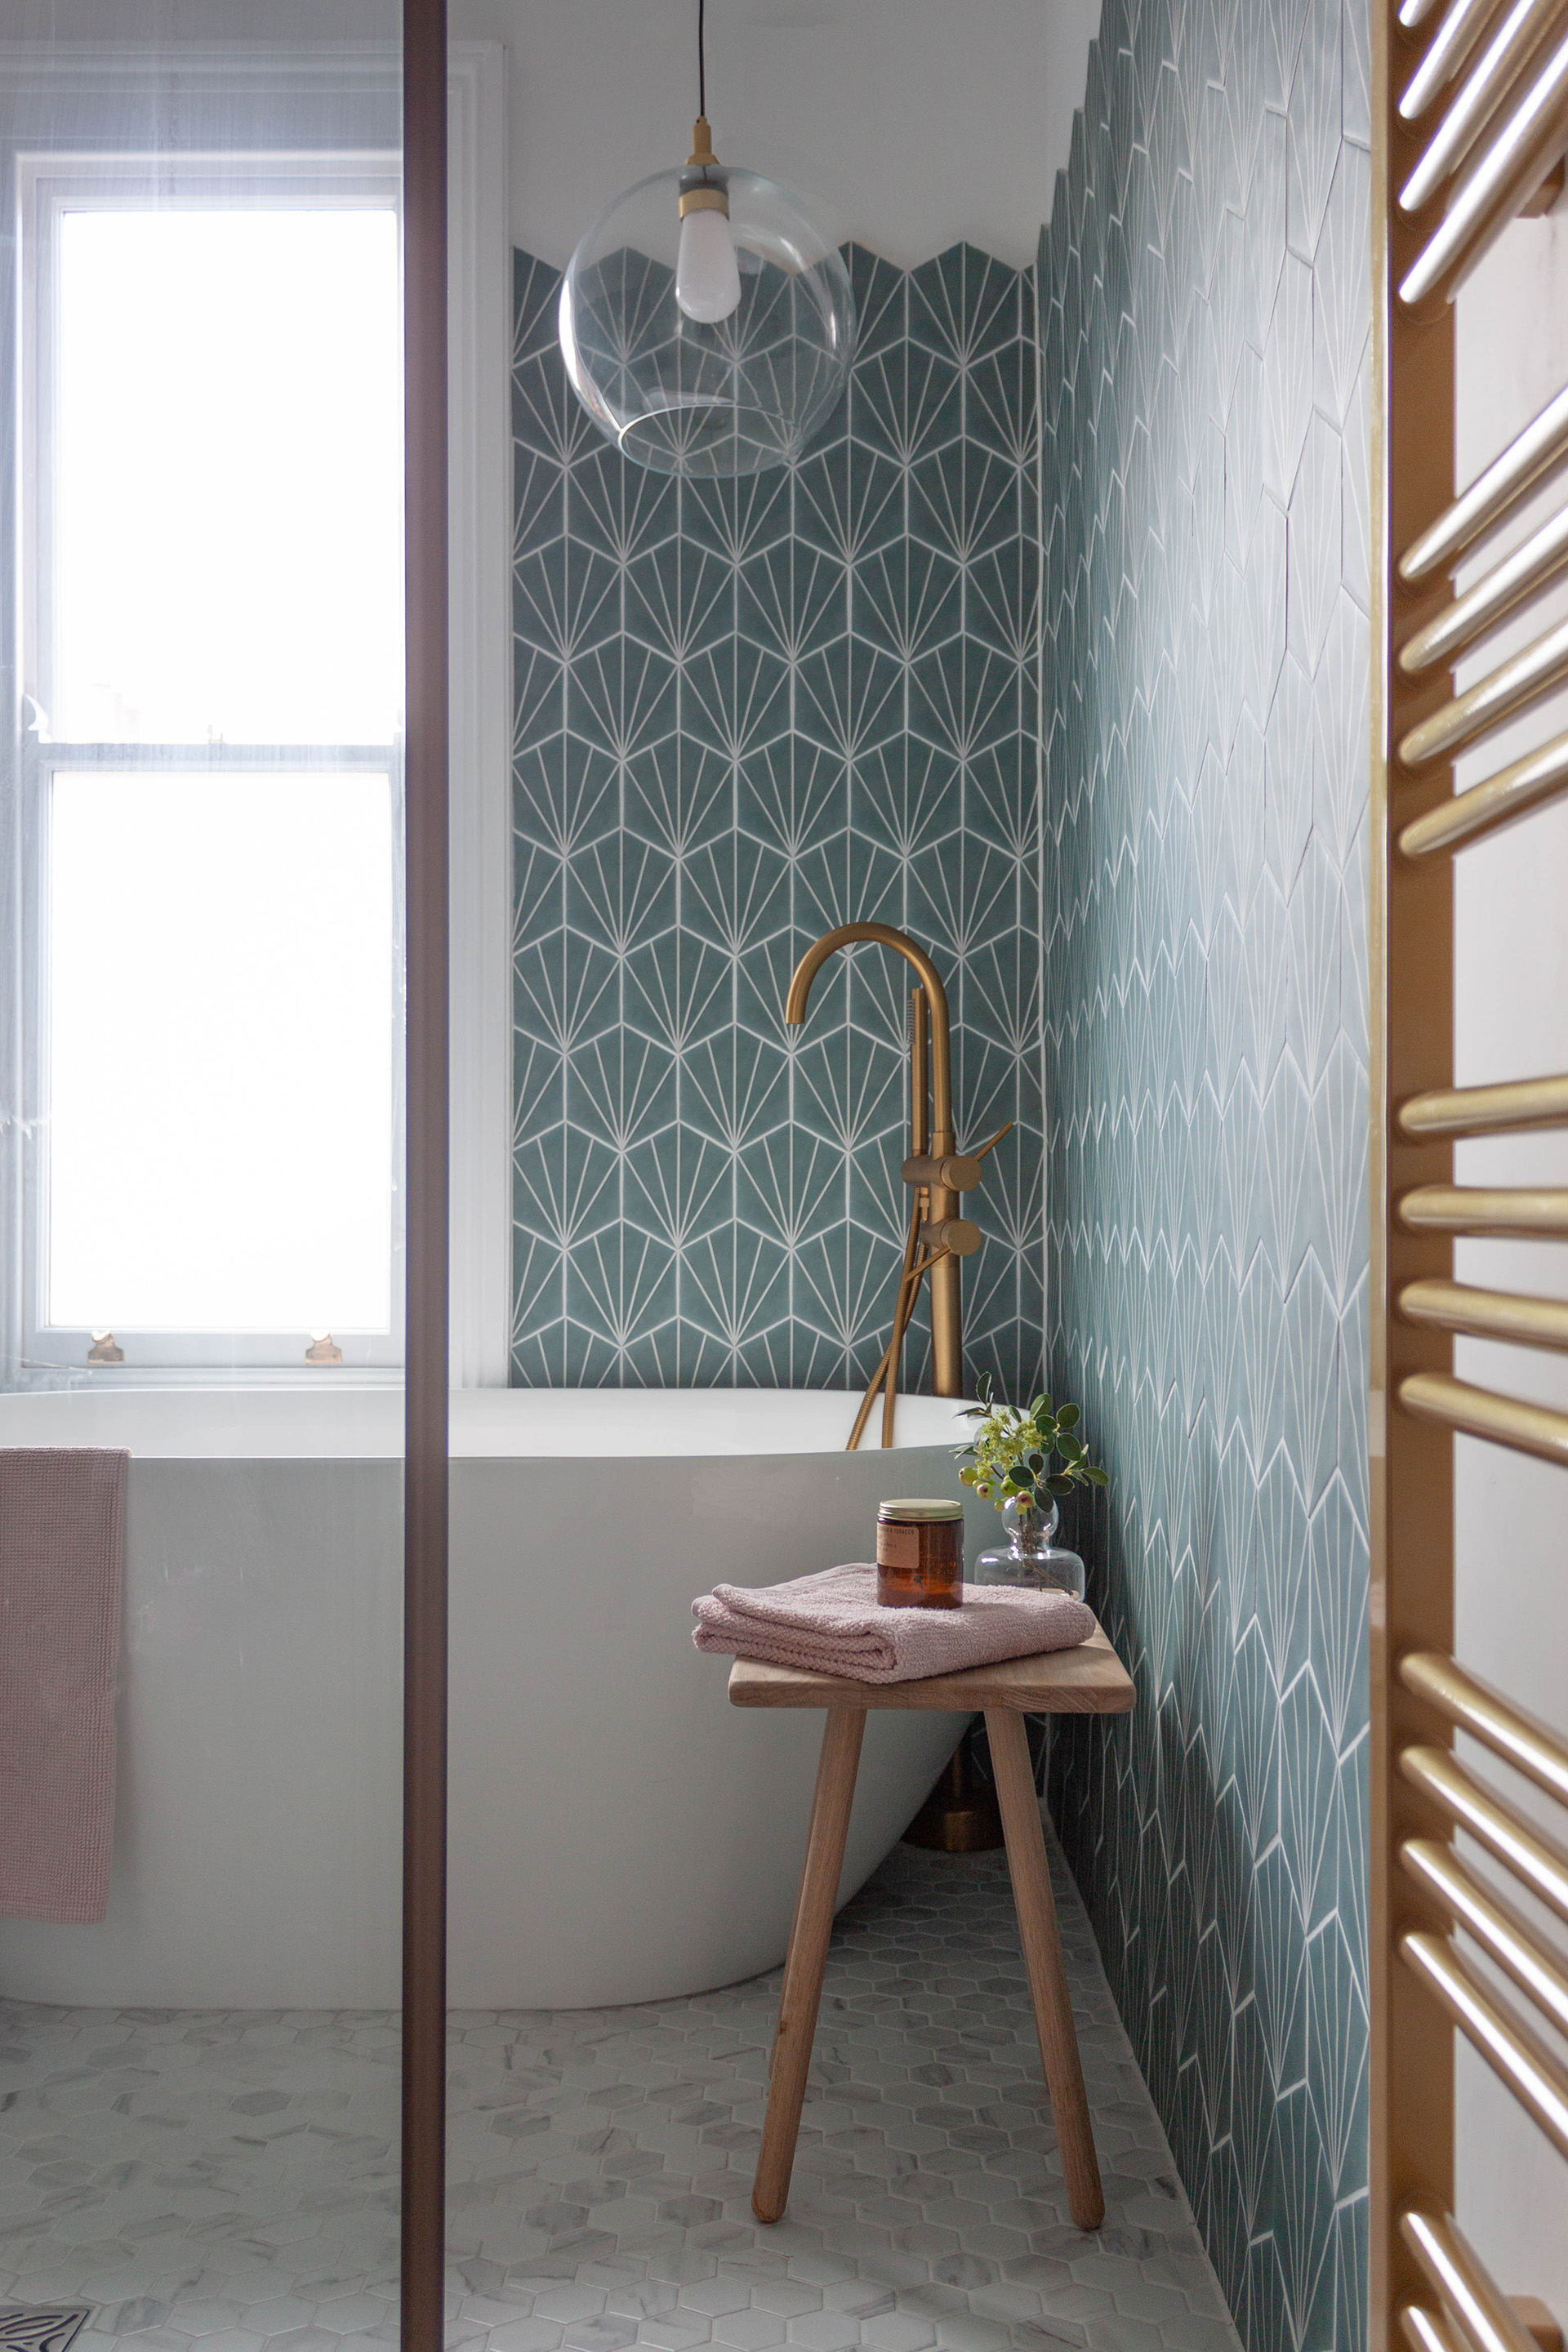 A snapshot of a wetroom area in a small victorian bathroom in Leamington Spa. Showing Hexagonal teal wall tiles, an elegant white freestanding bath and a brushed gold floorstanding bath filler. A bathroom rated pendant hangs over the bath.